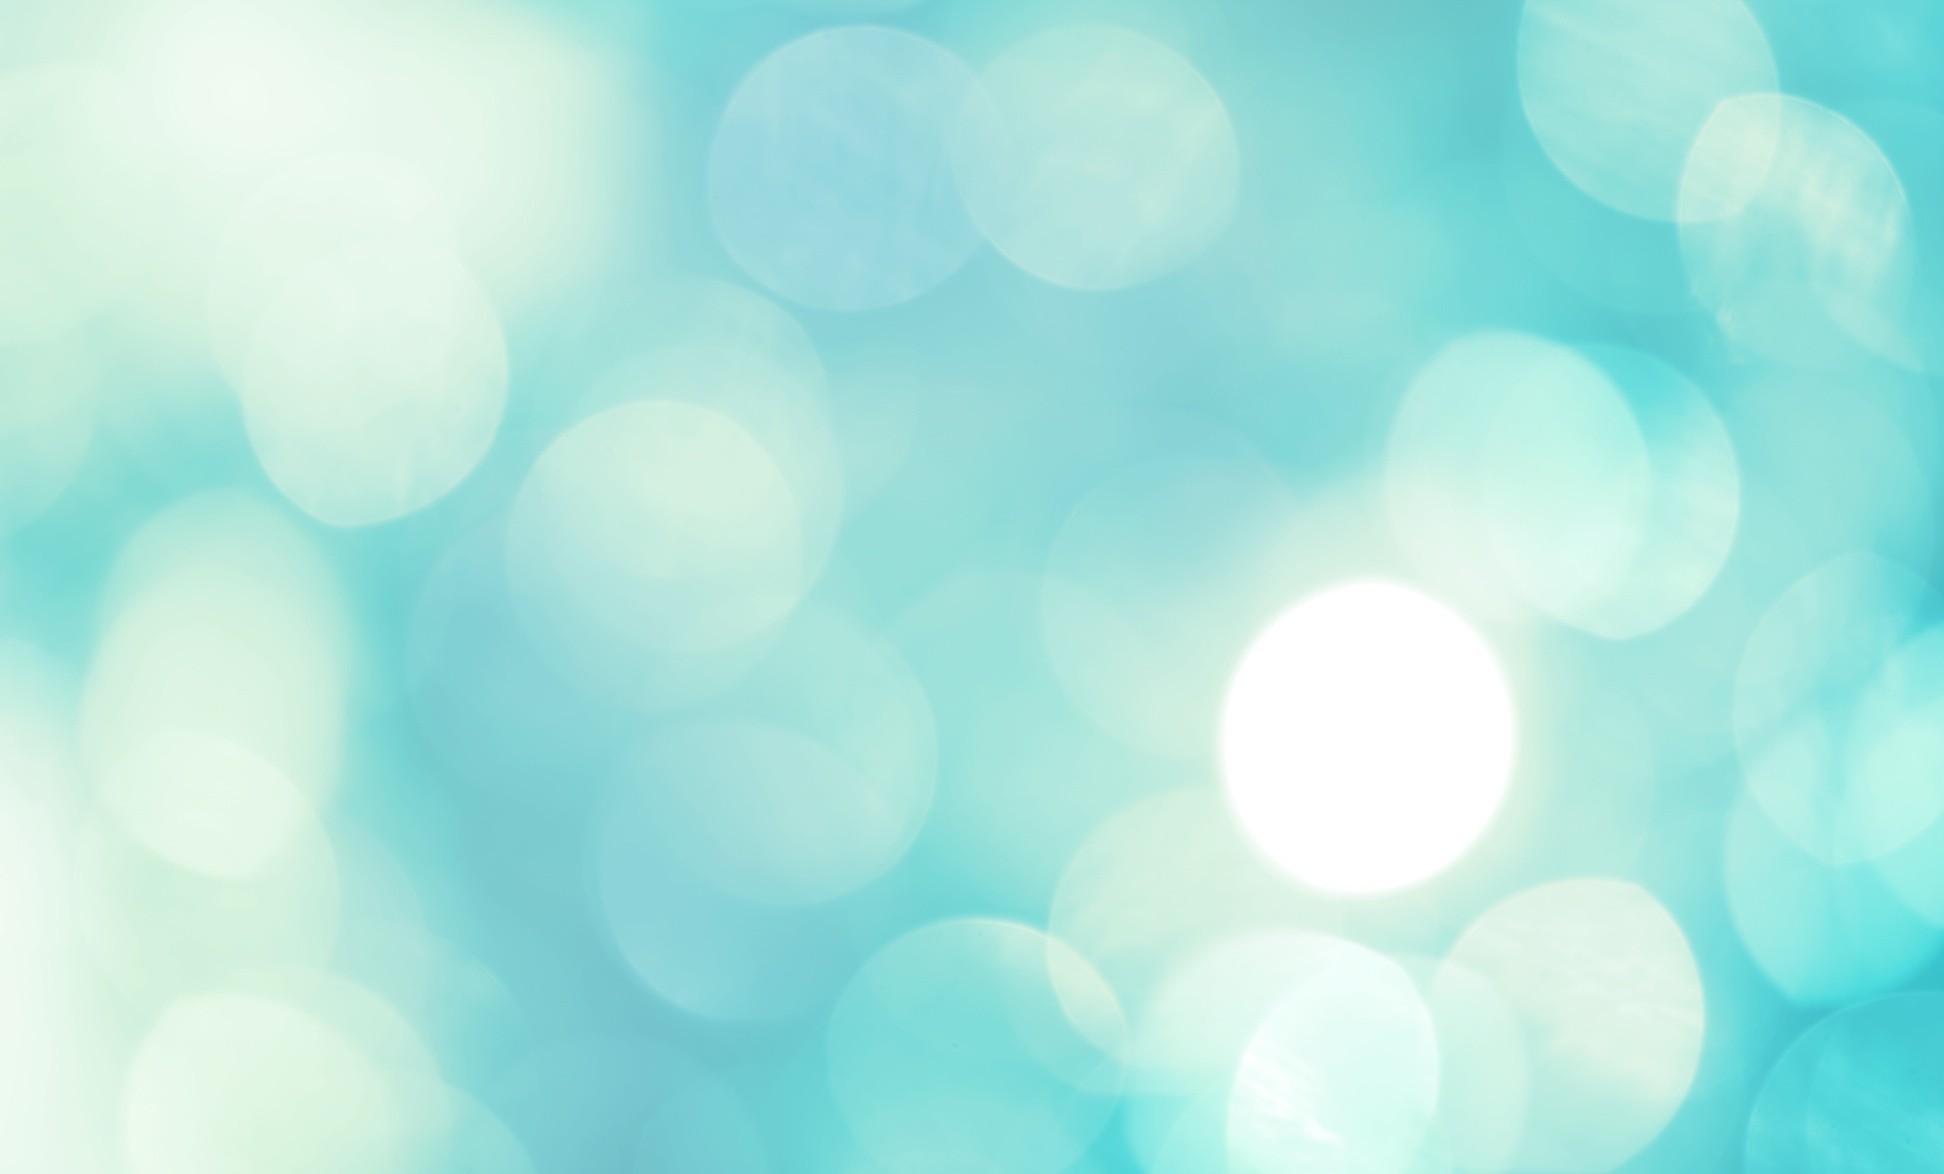 Teal and white abstract defocused light background